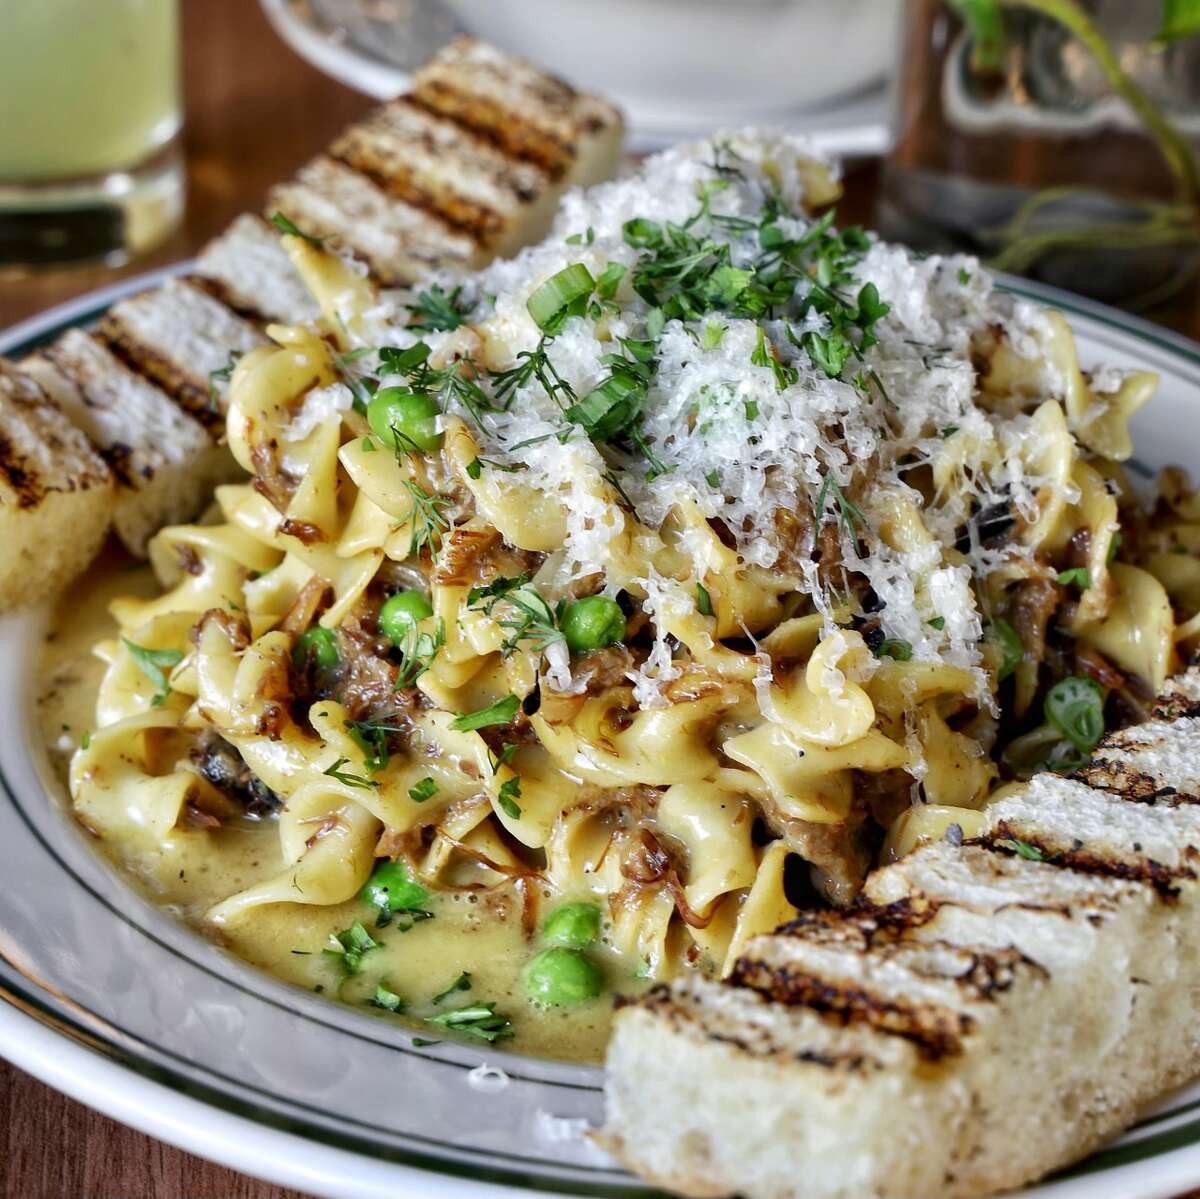 The Hayden, a Texas- and Jewish delicatessen-inspired restaurant which opened in October, serves barbacoa stroganoff on the all-day menu for $18.99. Owner Adam Lampinstein describes his diner's take on the creamy pasta dish as an infusion of two cultural staples.